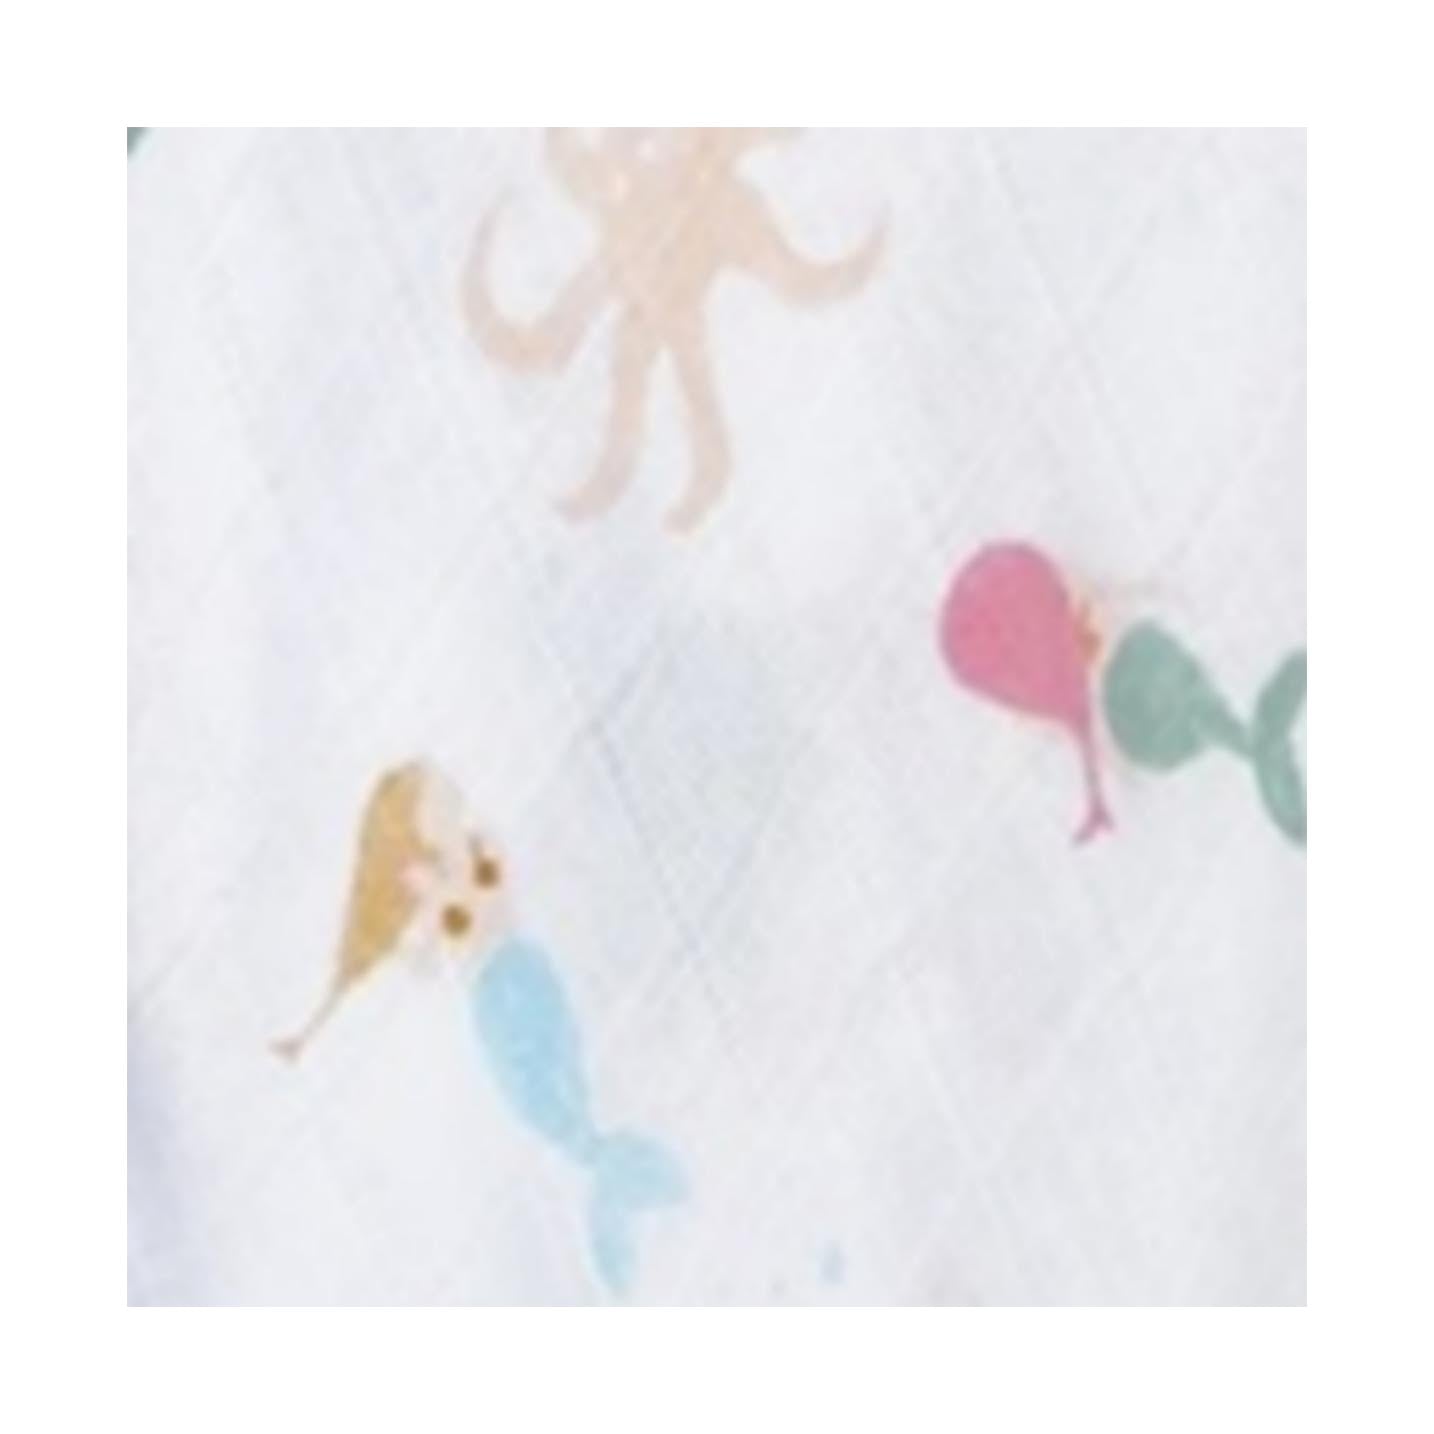 Salty Kisses Muslin Cotton Swaddles Singles